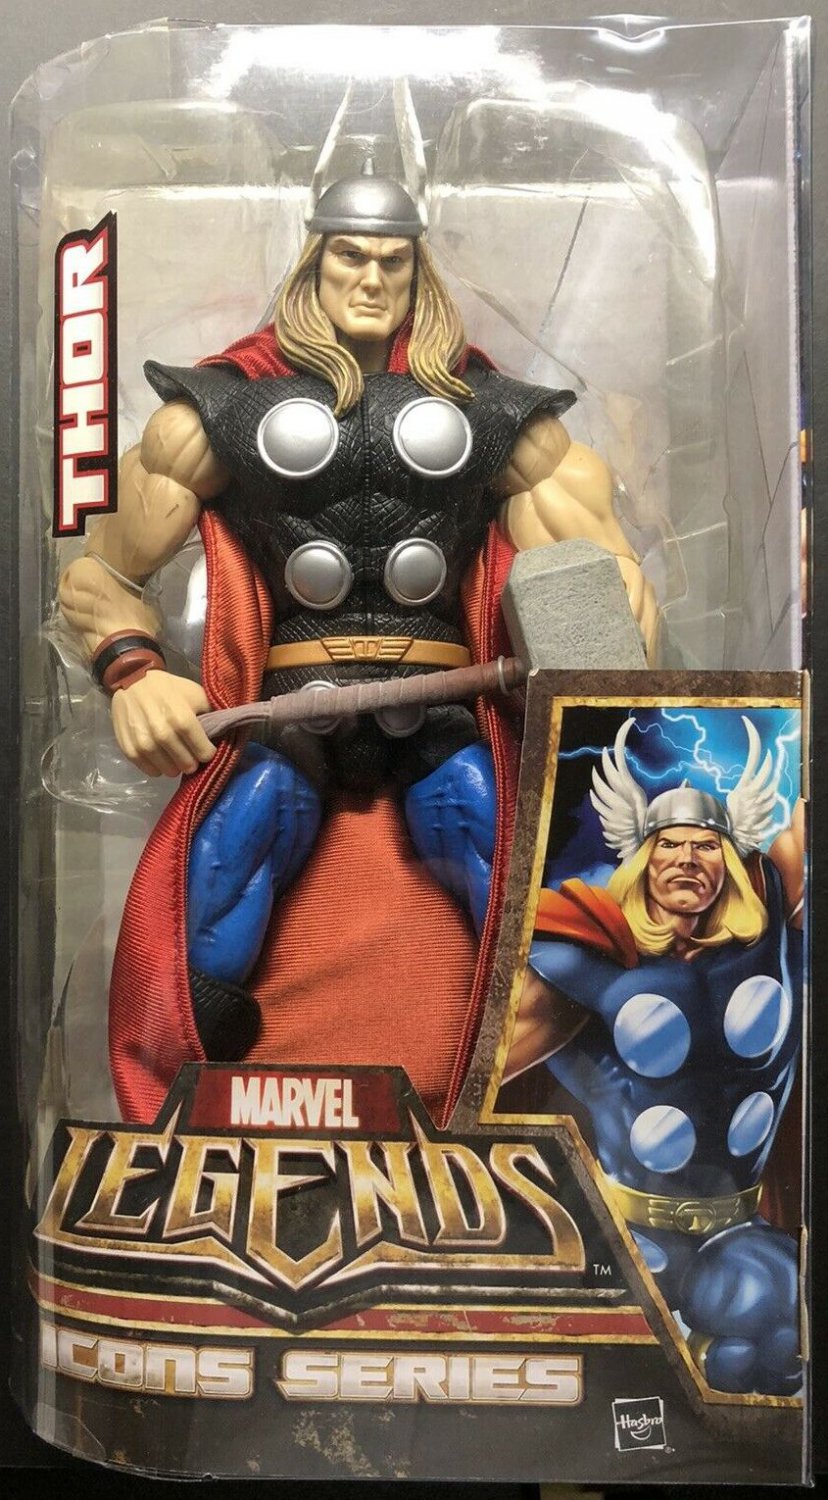 MARVEL LEGENDS ICONS SERIES WAVE THOR ODINSON 12 INCH ACTION FIGURE ...